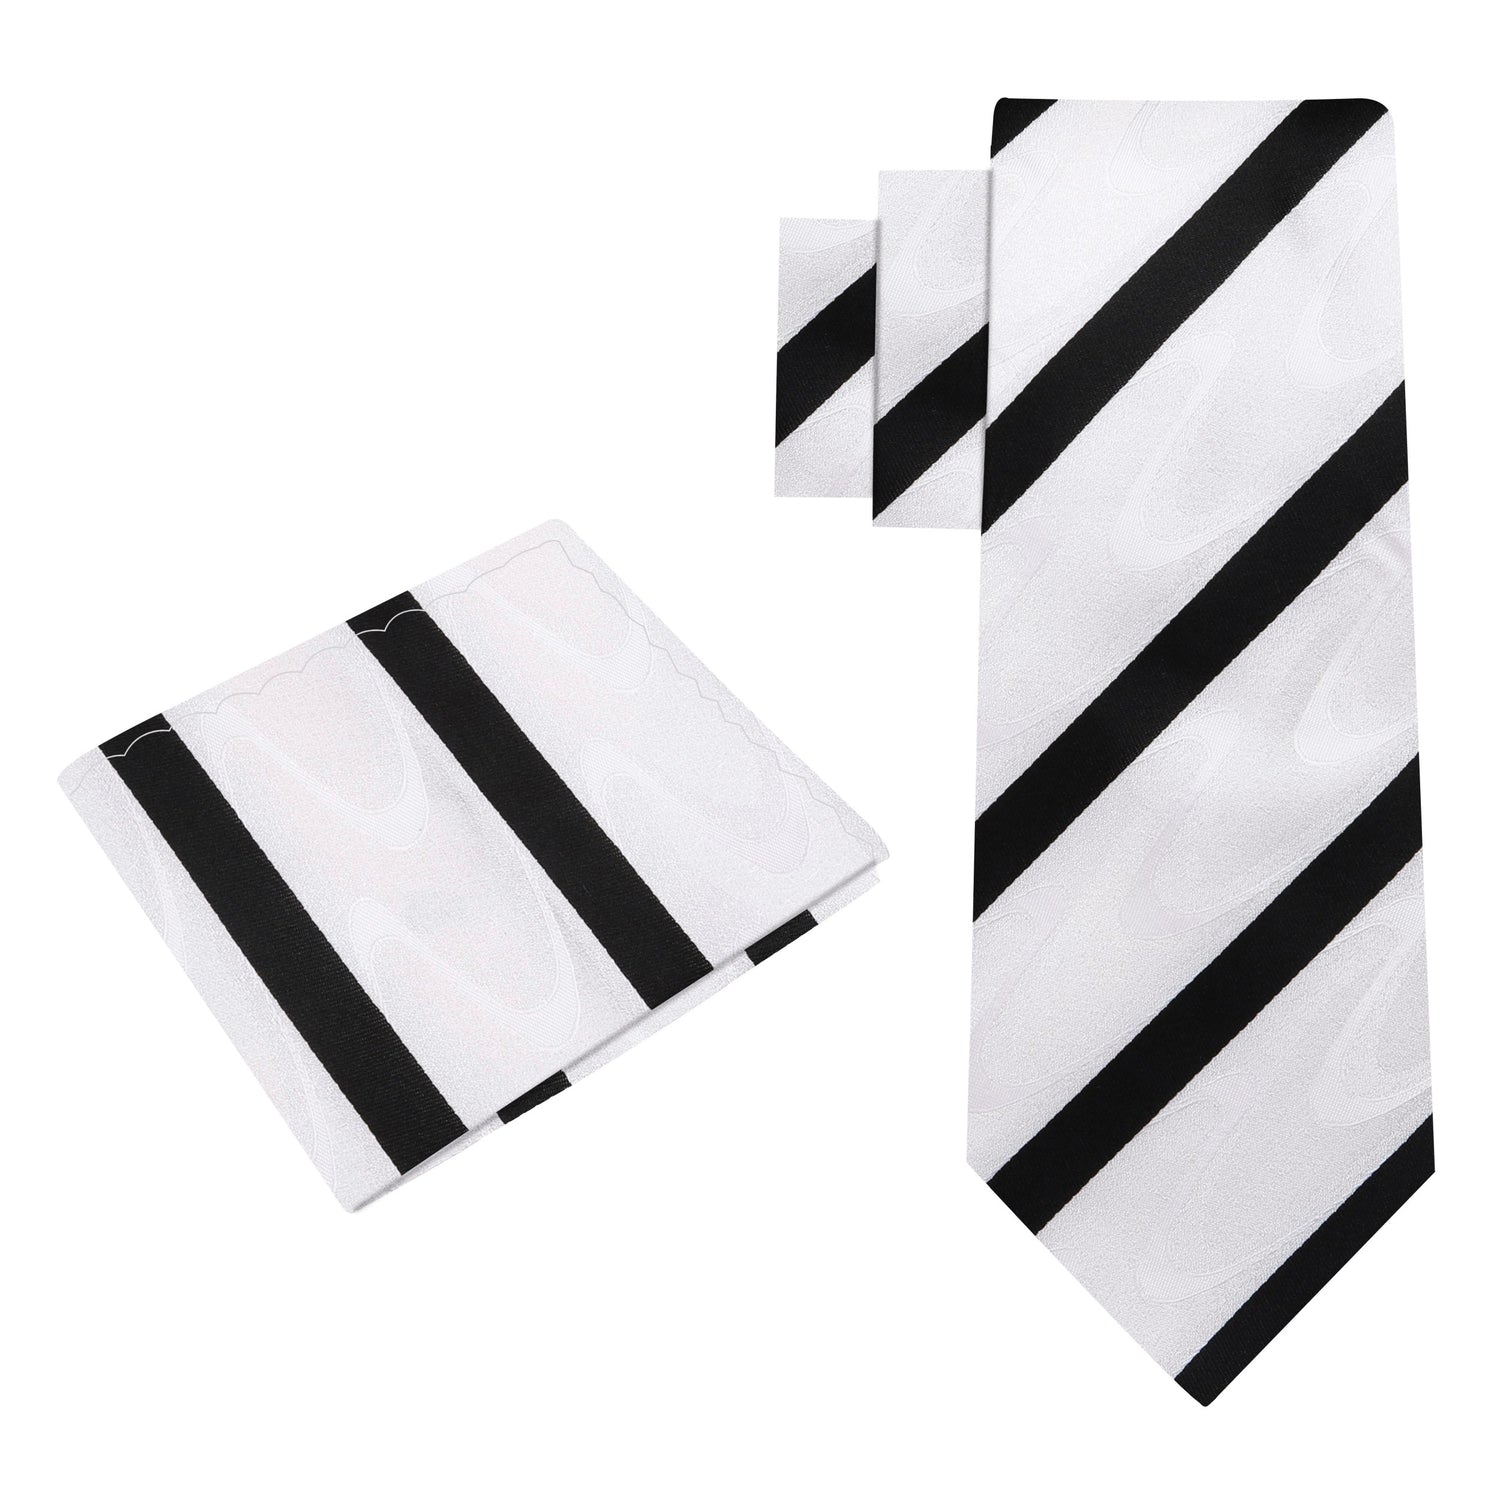 Alt View: A White With Abstract Wave And Black Stripe Pattern Silk Necktie, Pocket Square